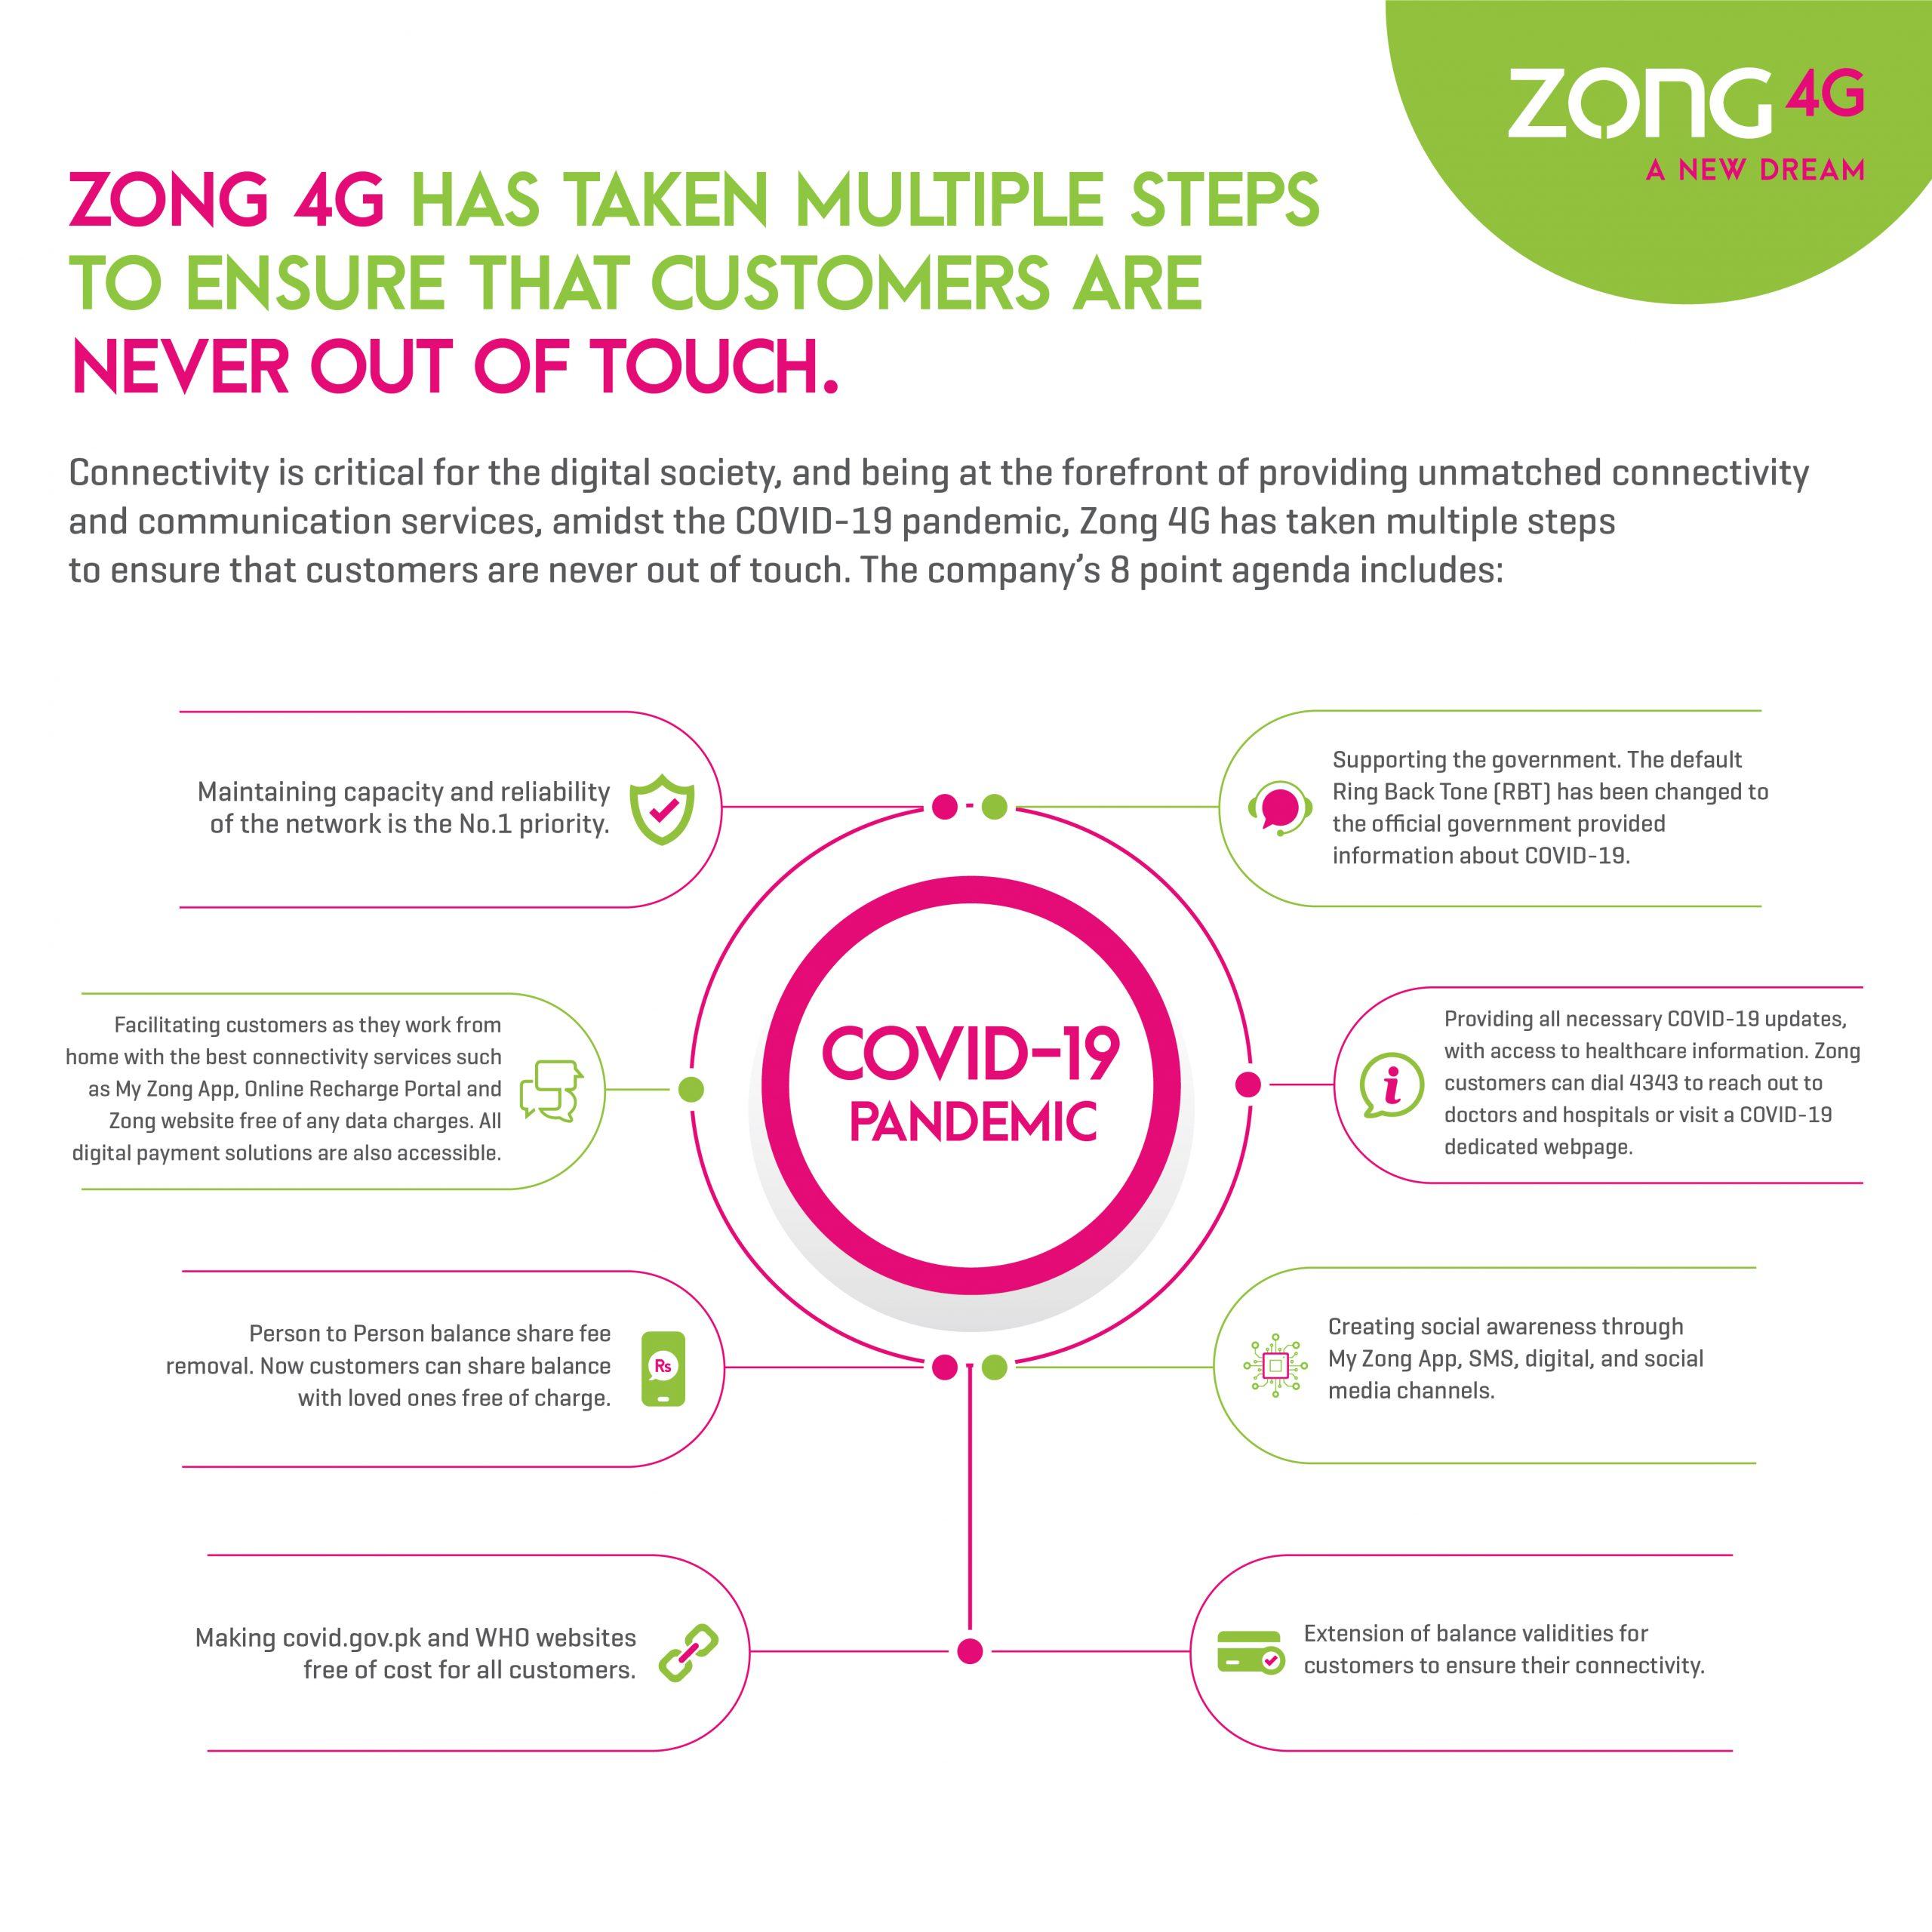 Stay United and Connected with Zong 4G